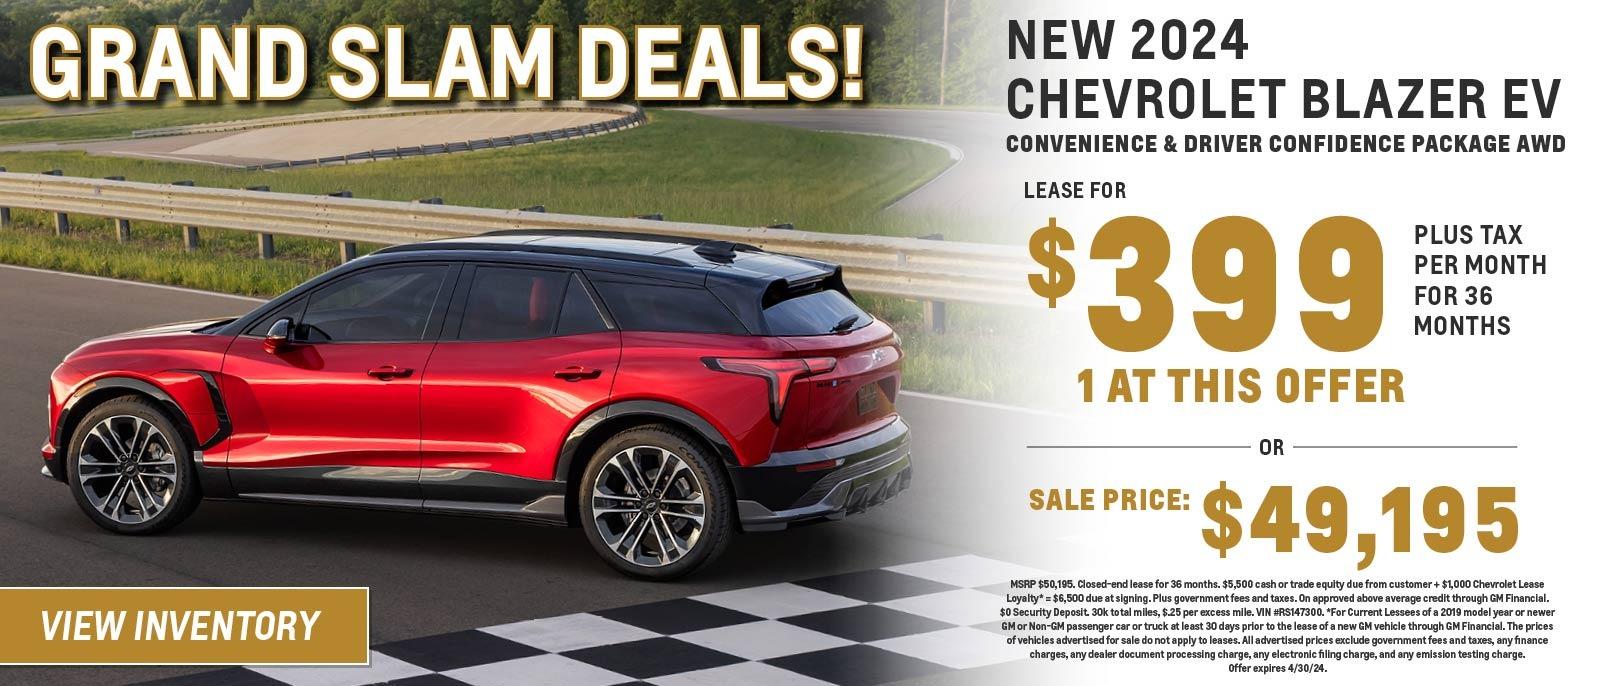 New 2024 Chevrolet Blazer EV
Lease for $399/36 months plus tax or Sale price $49,195
1 at this offer